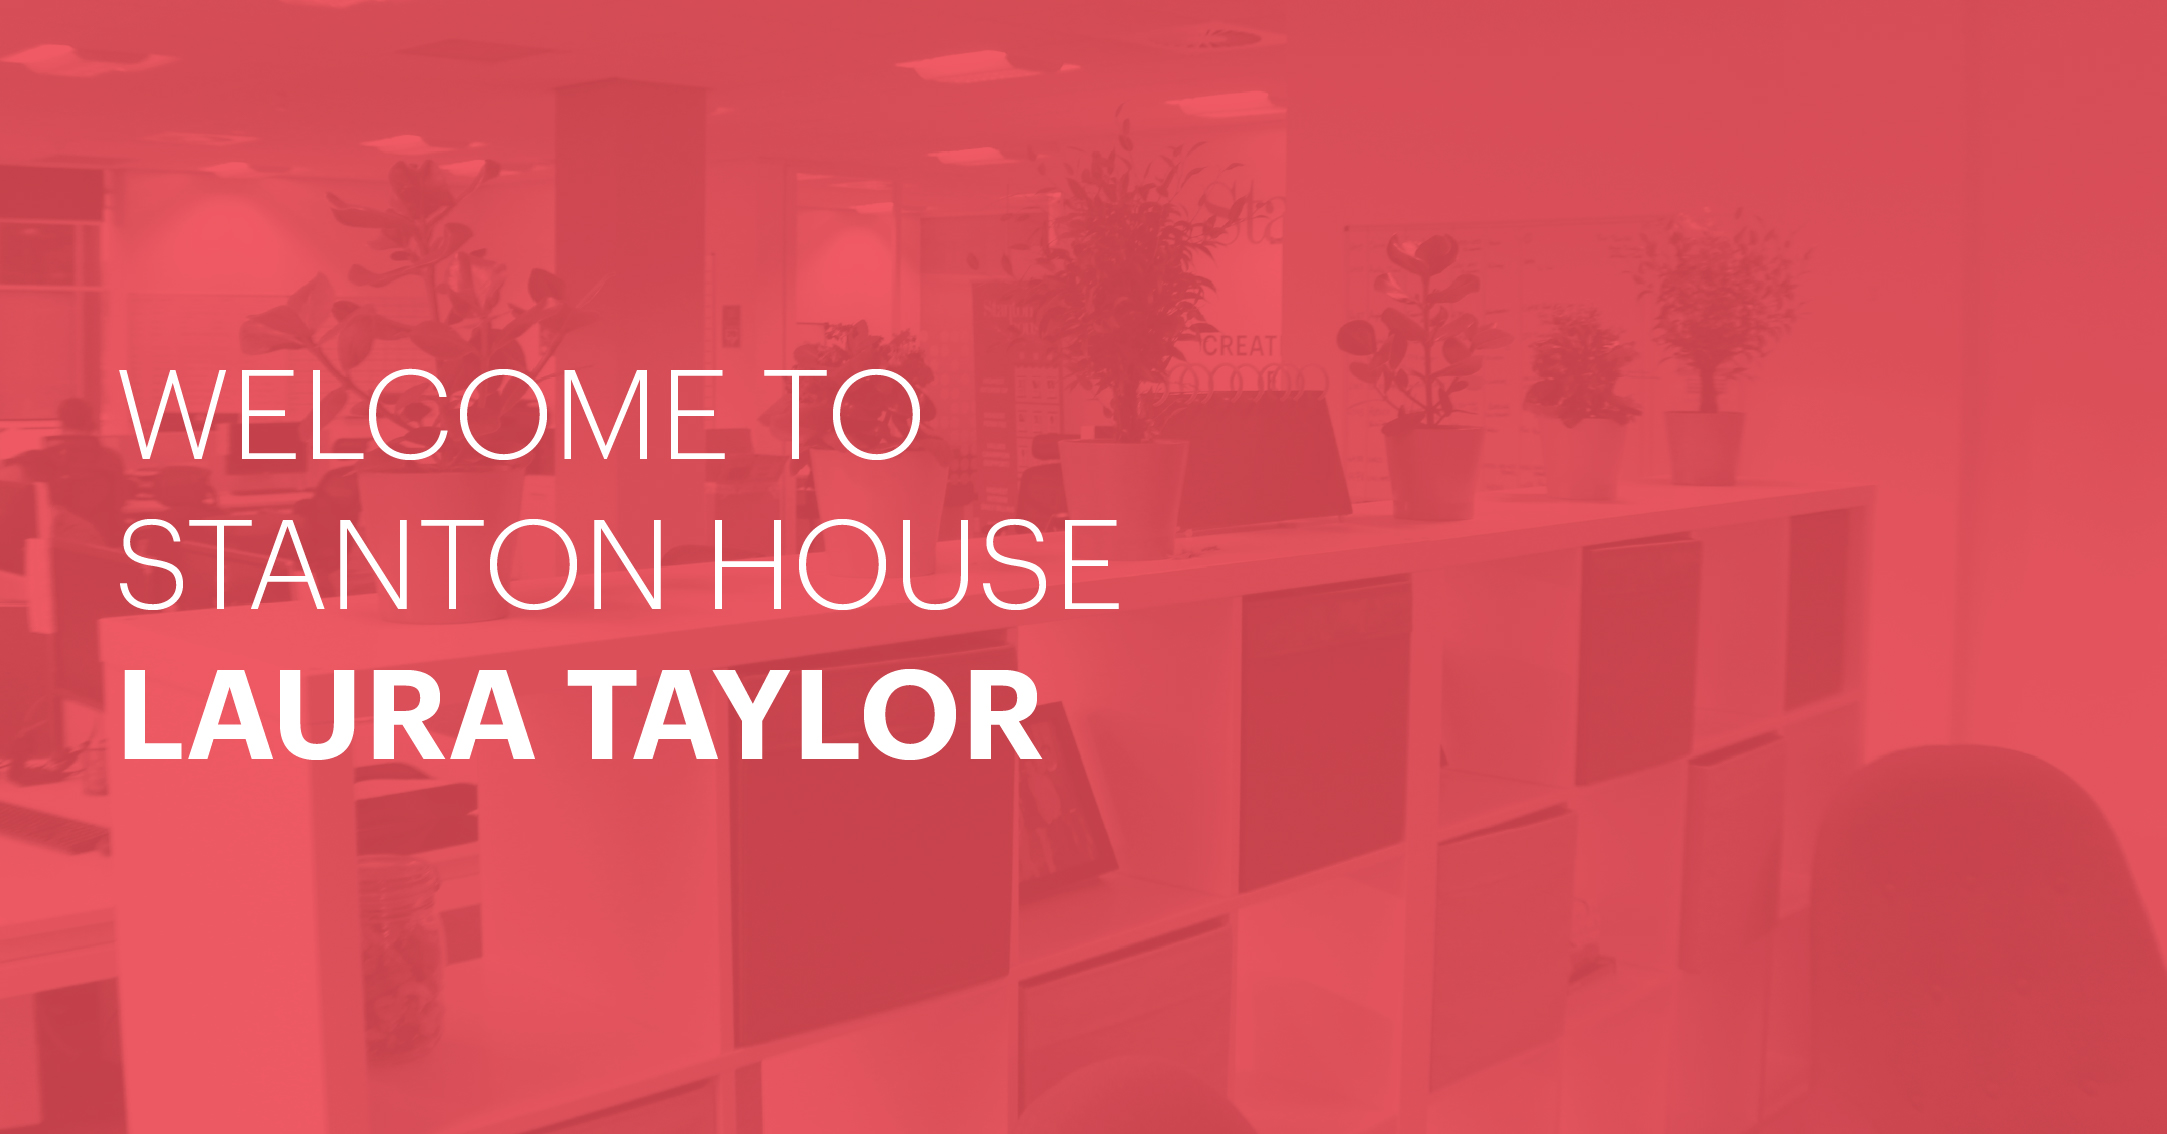 Welcome to Stanton House Laura Taylor